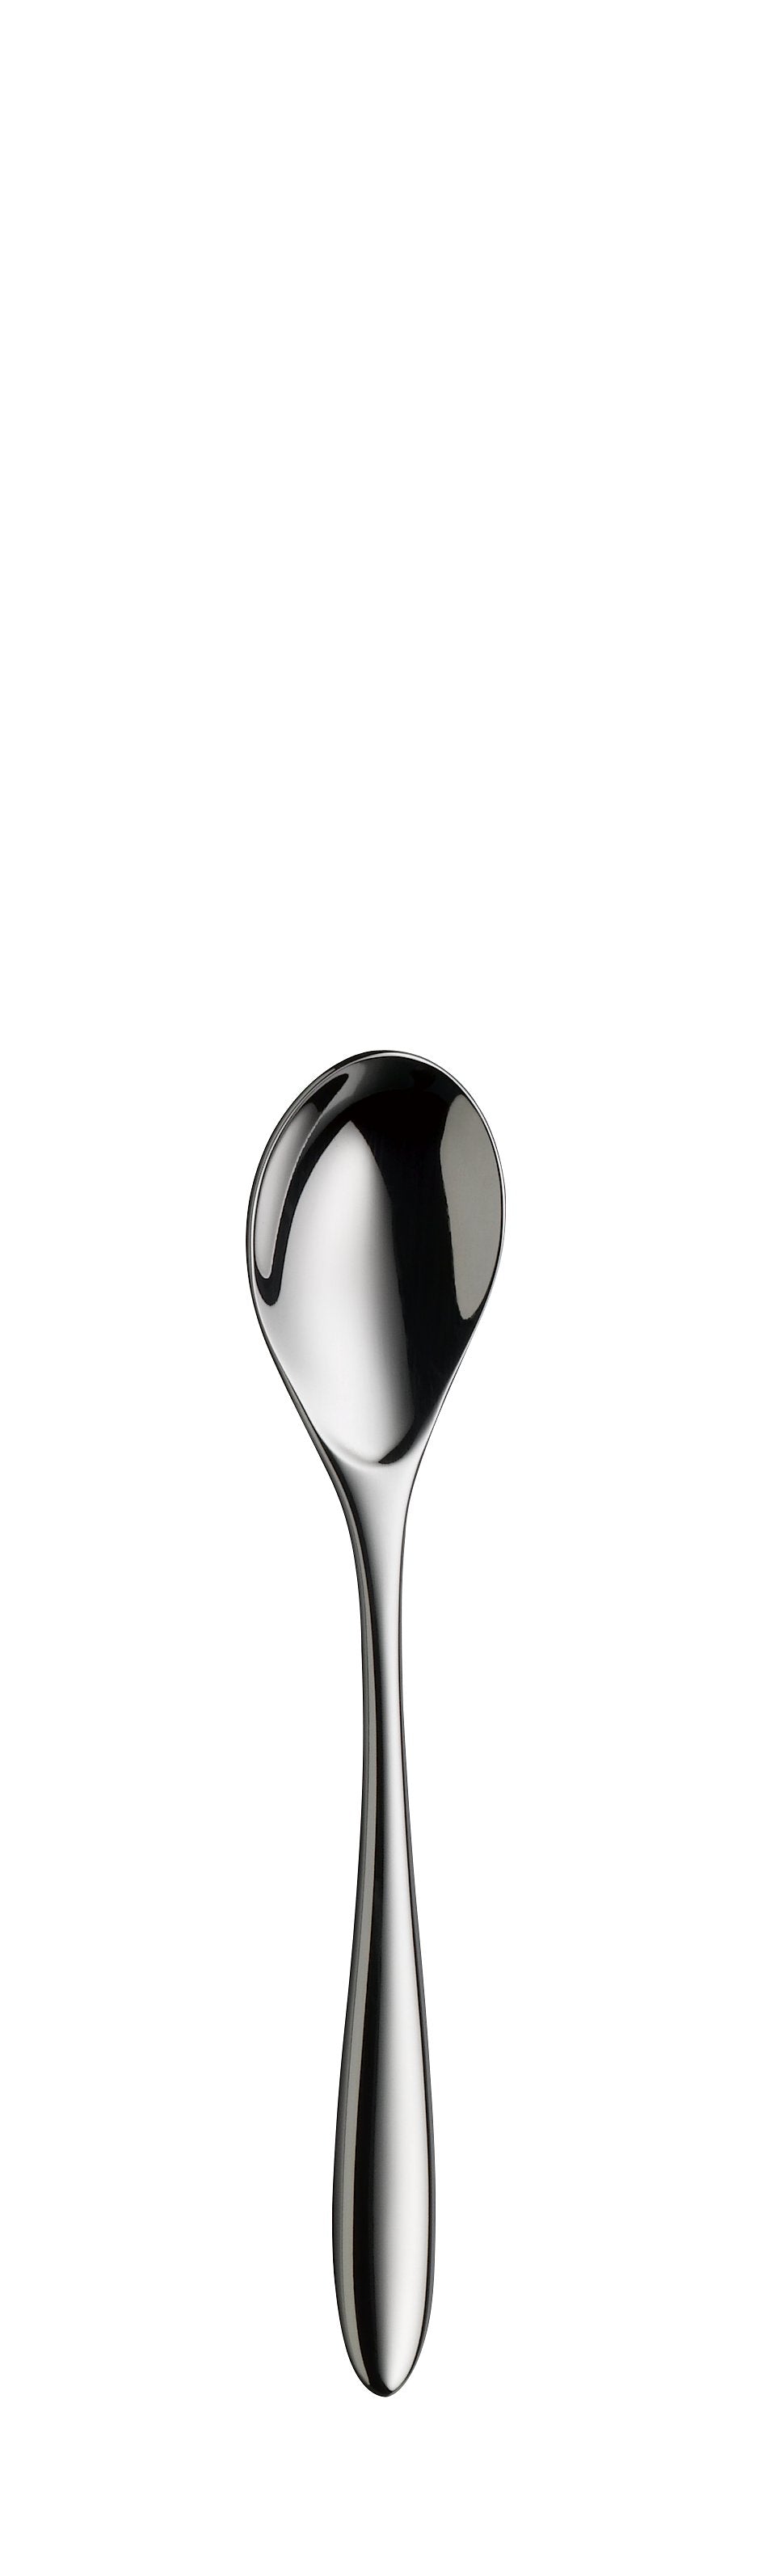 Coffee spoon AVES 136mm